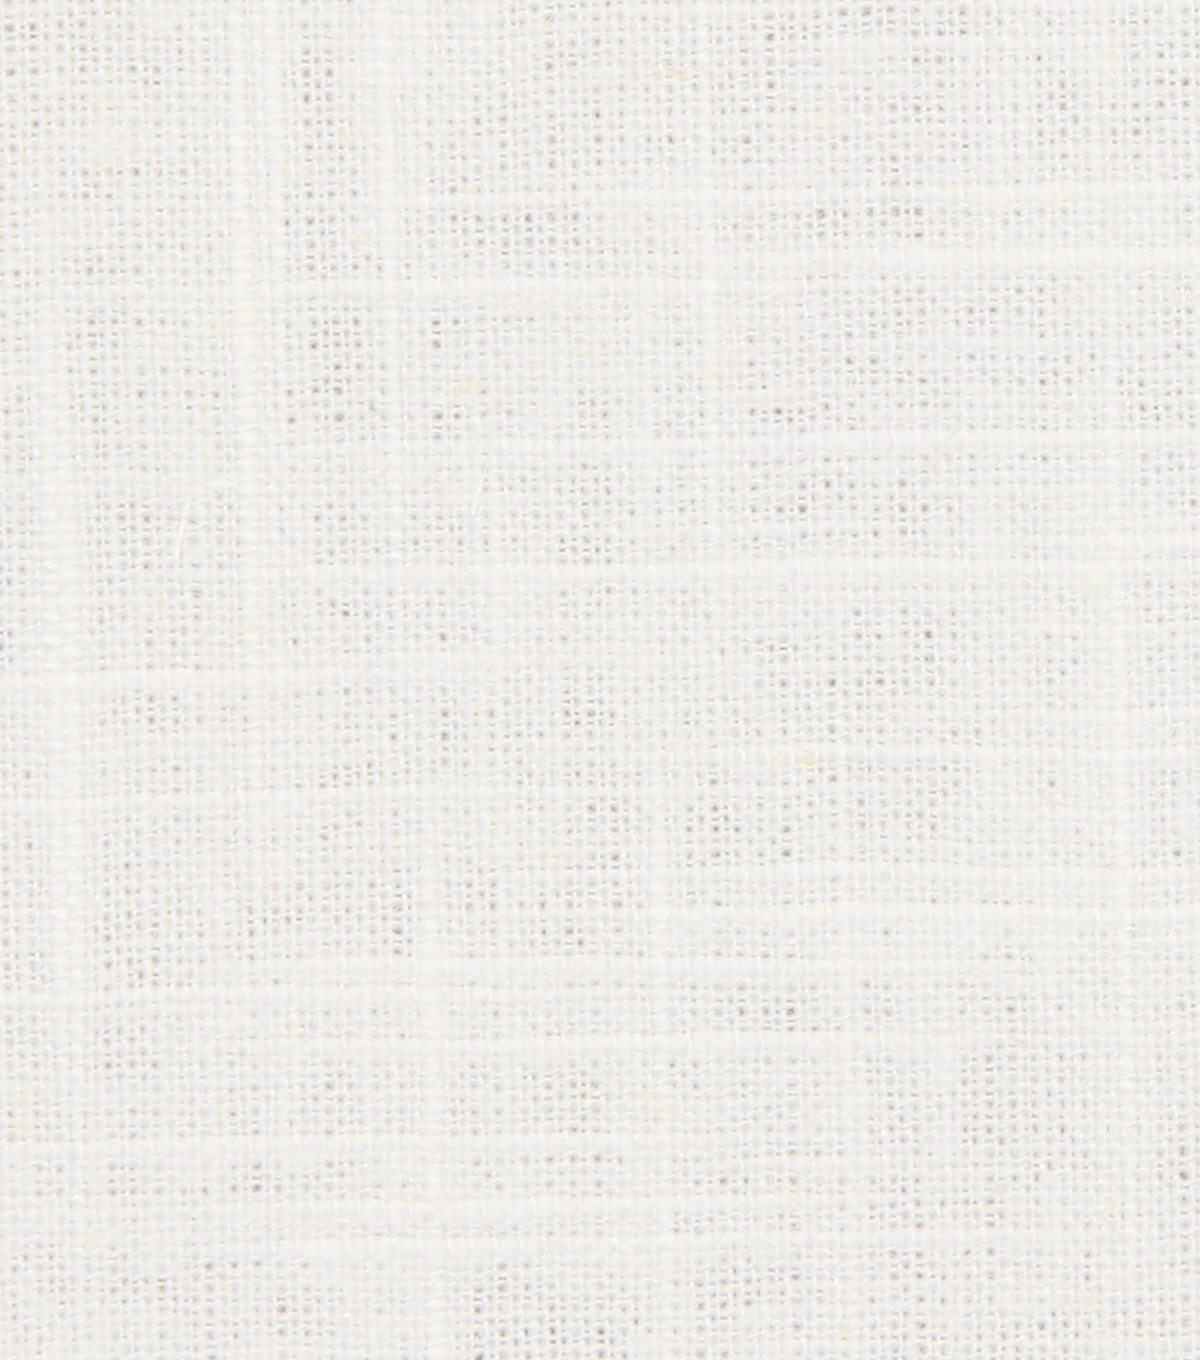 White Linen coloured Sheer fabric swatch